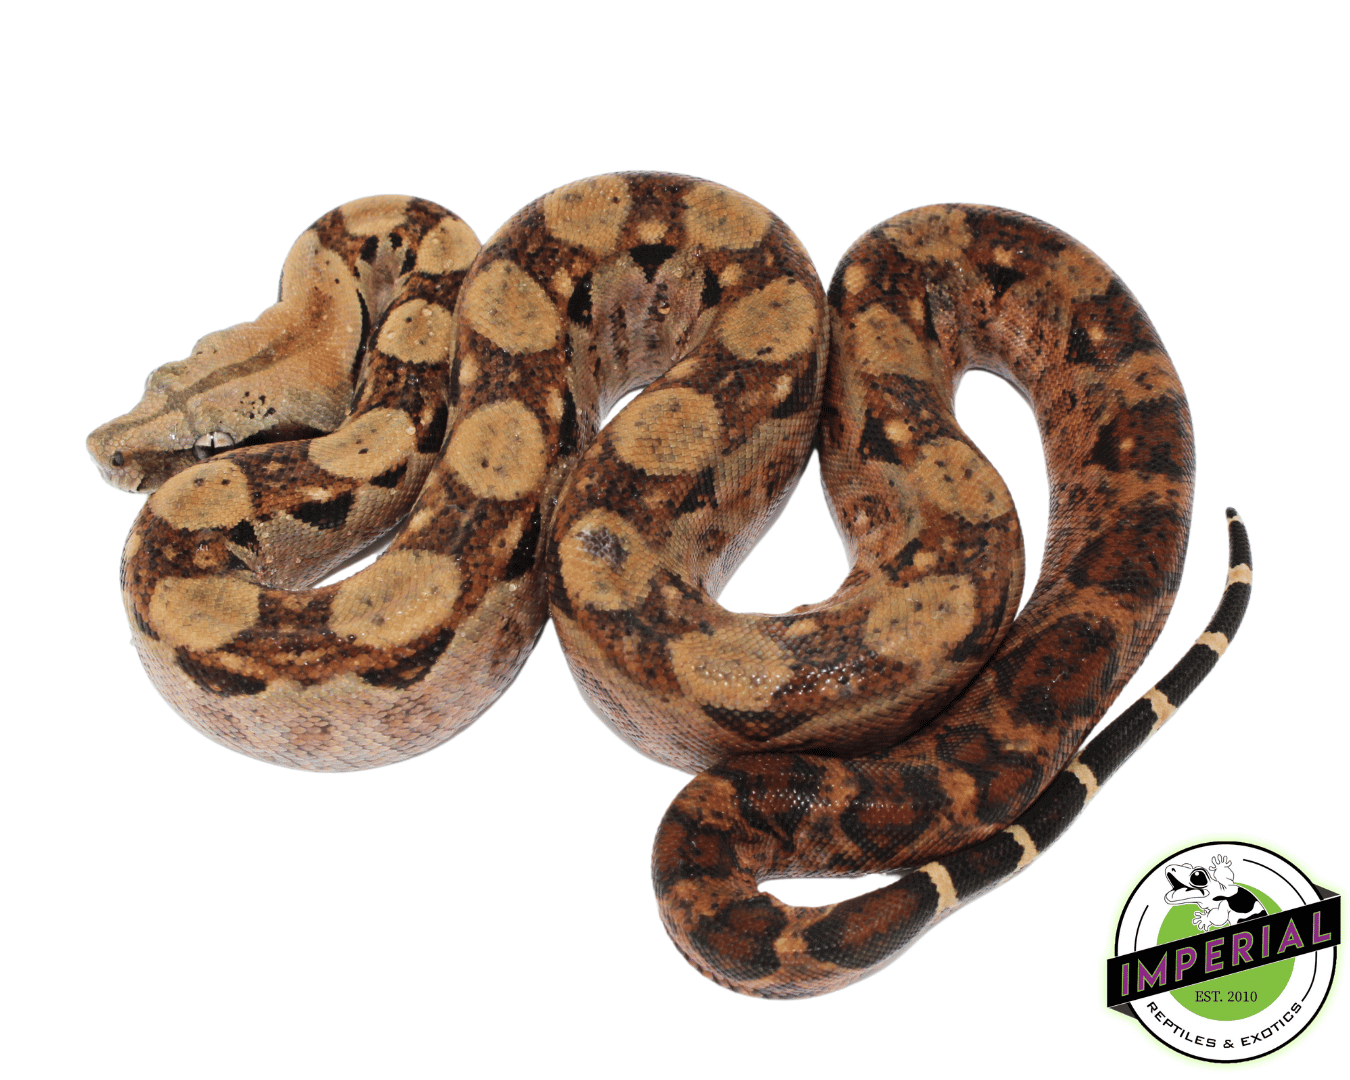 nicaraguan red tail boa constrictor for sale, buy reptiles online